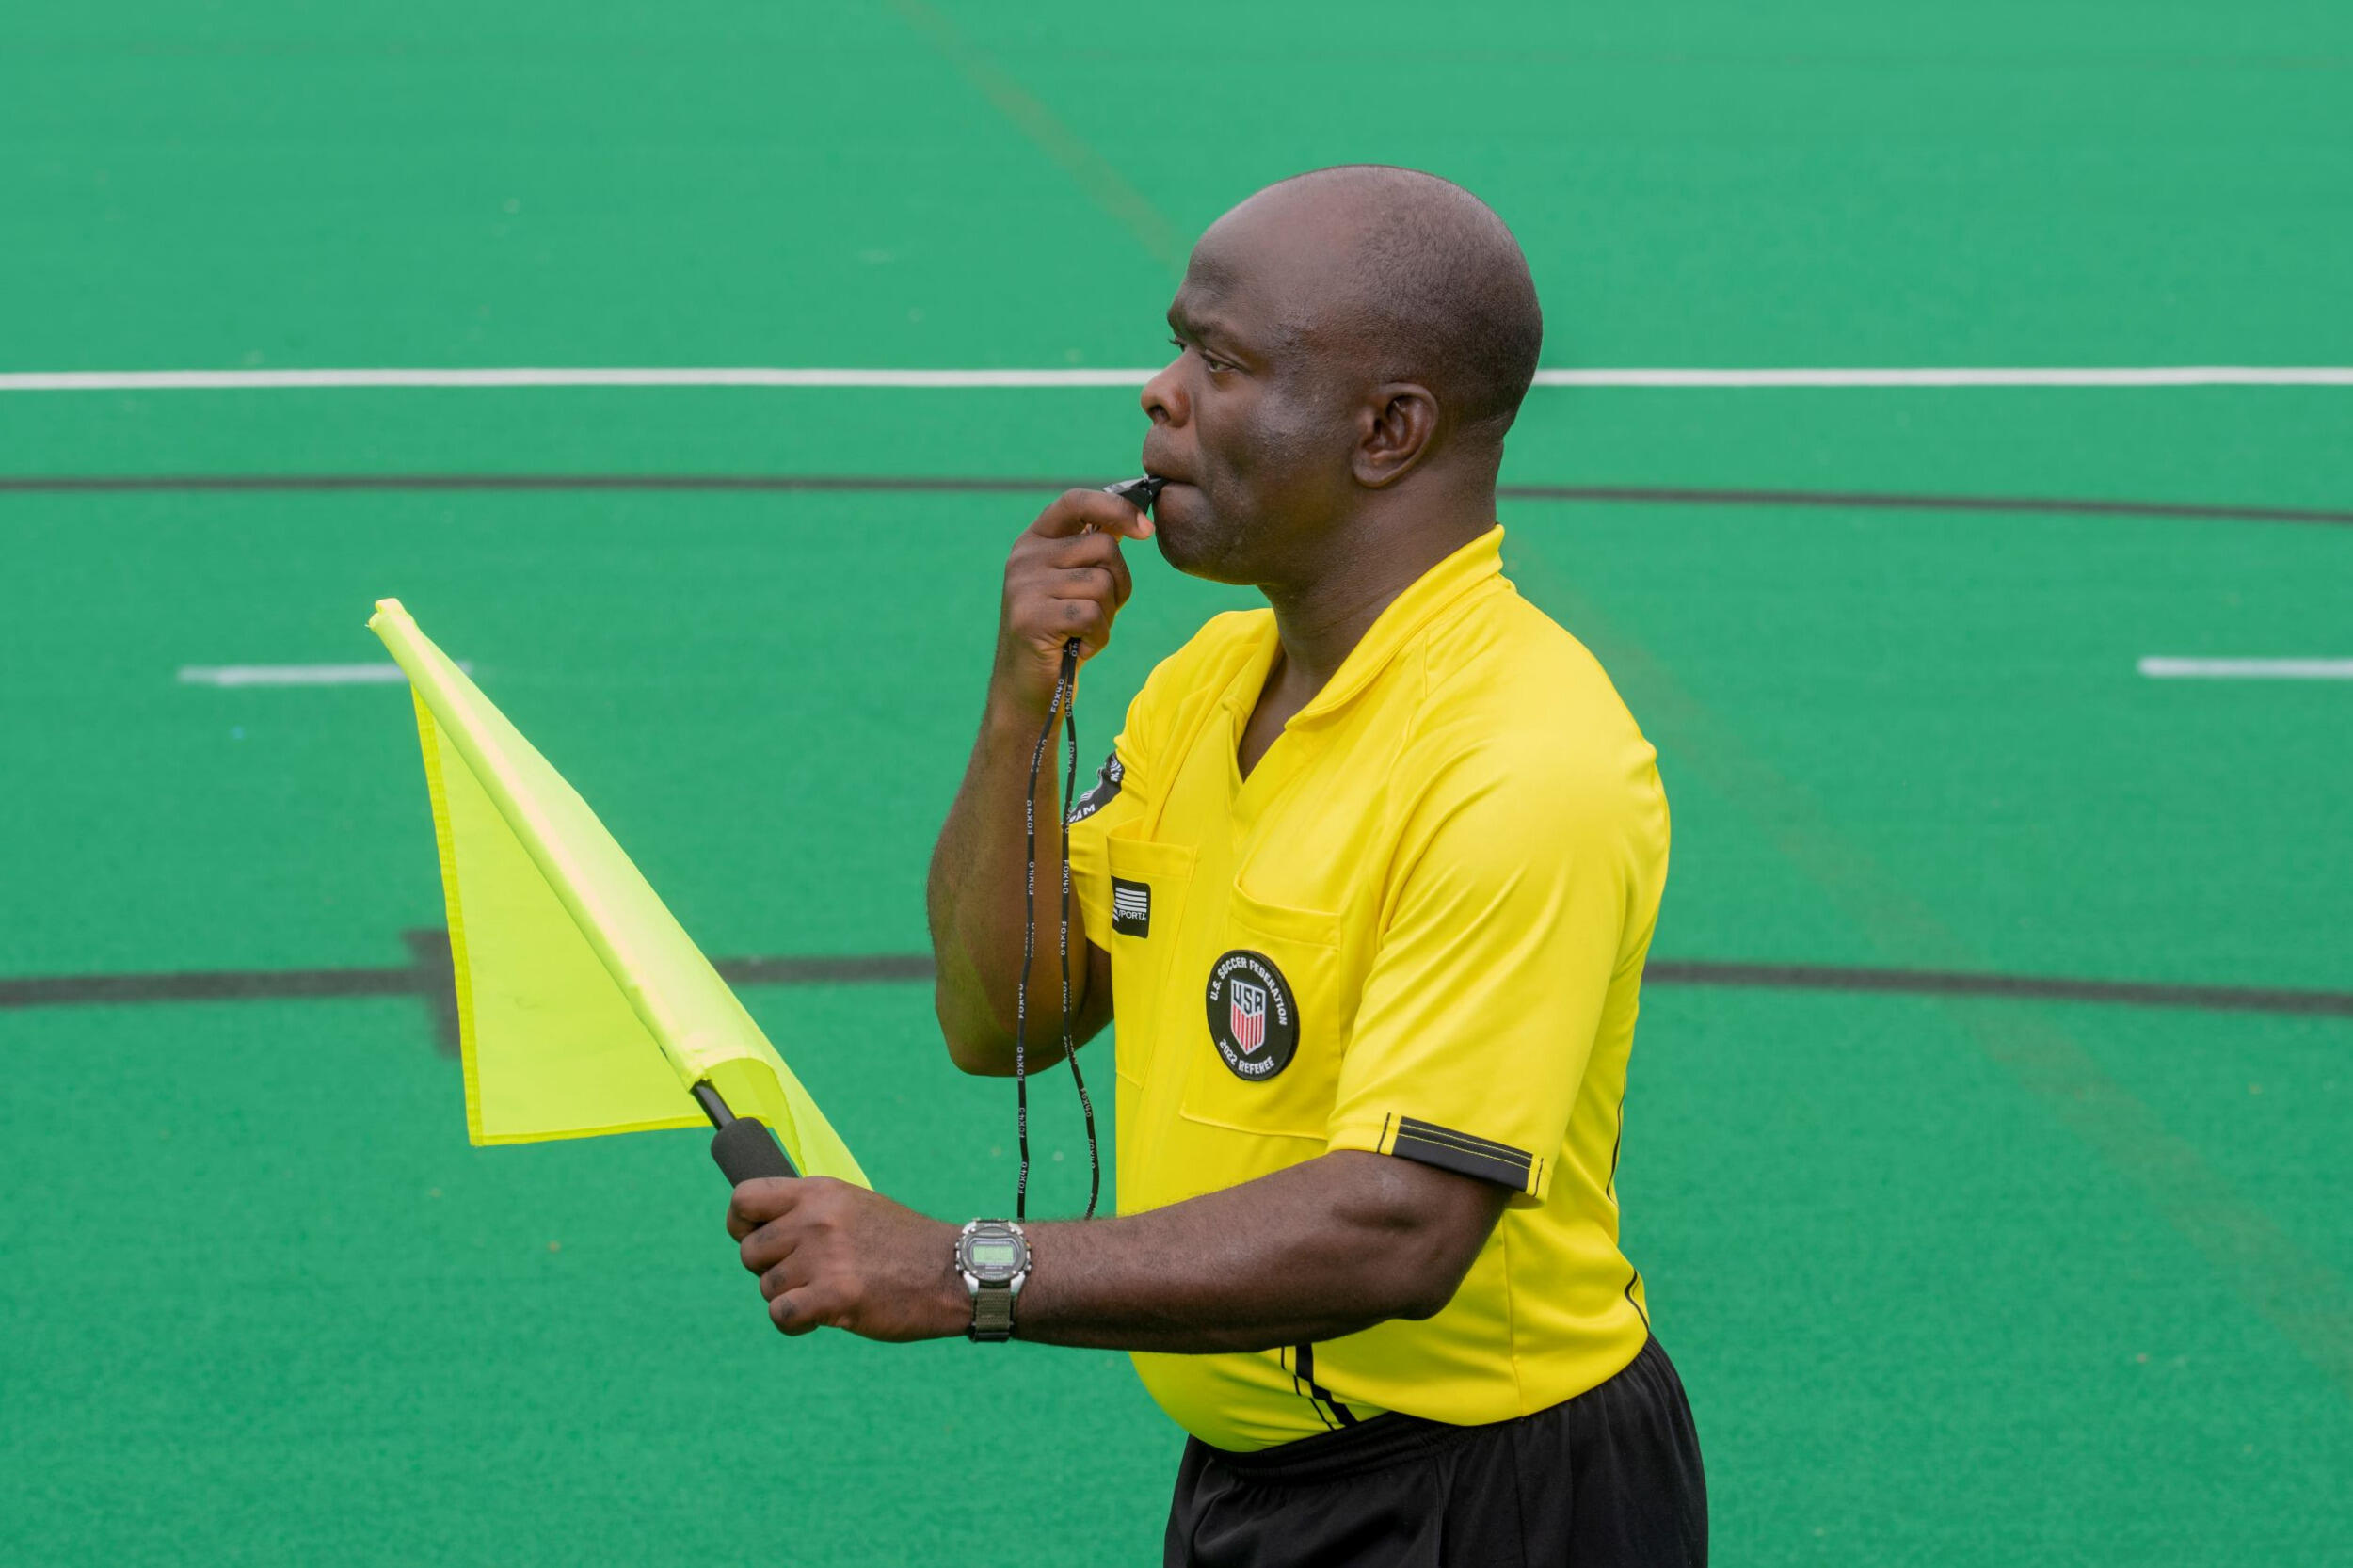 Kwasi Deitutu in soccer ref uniform holds a flag and blows a whistle.